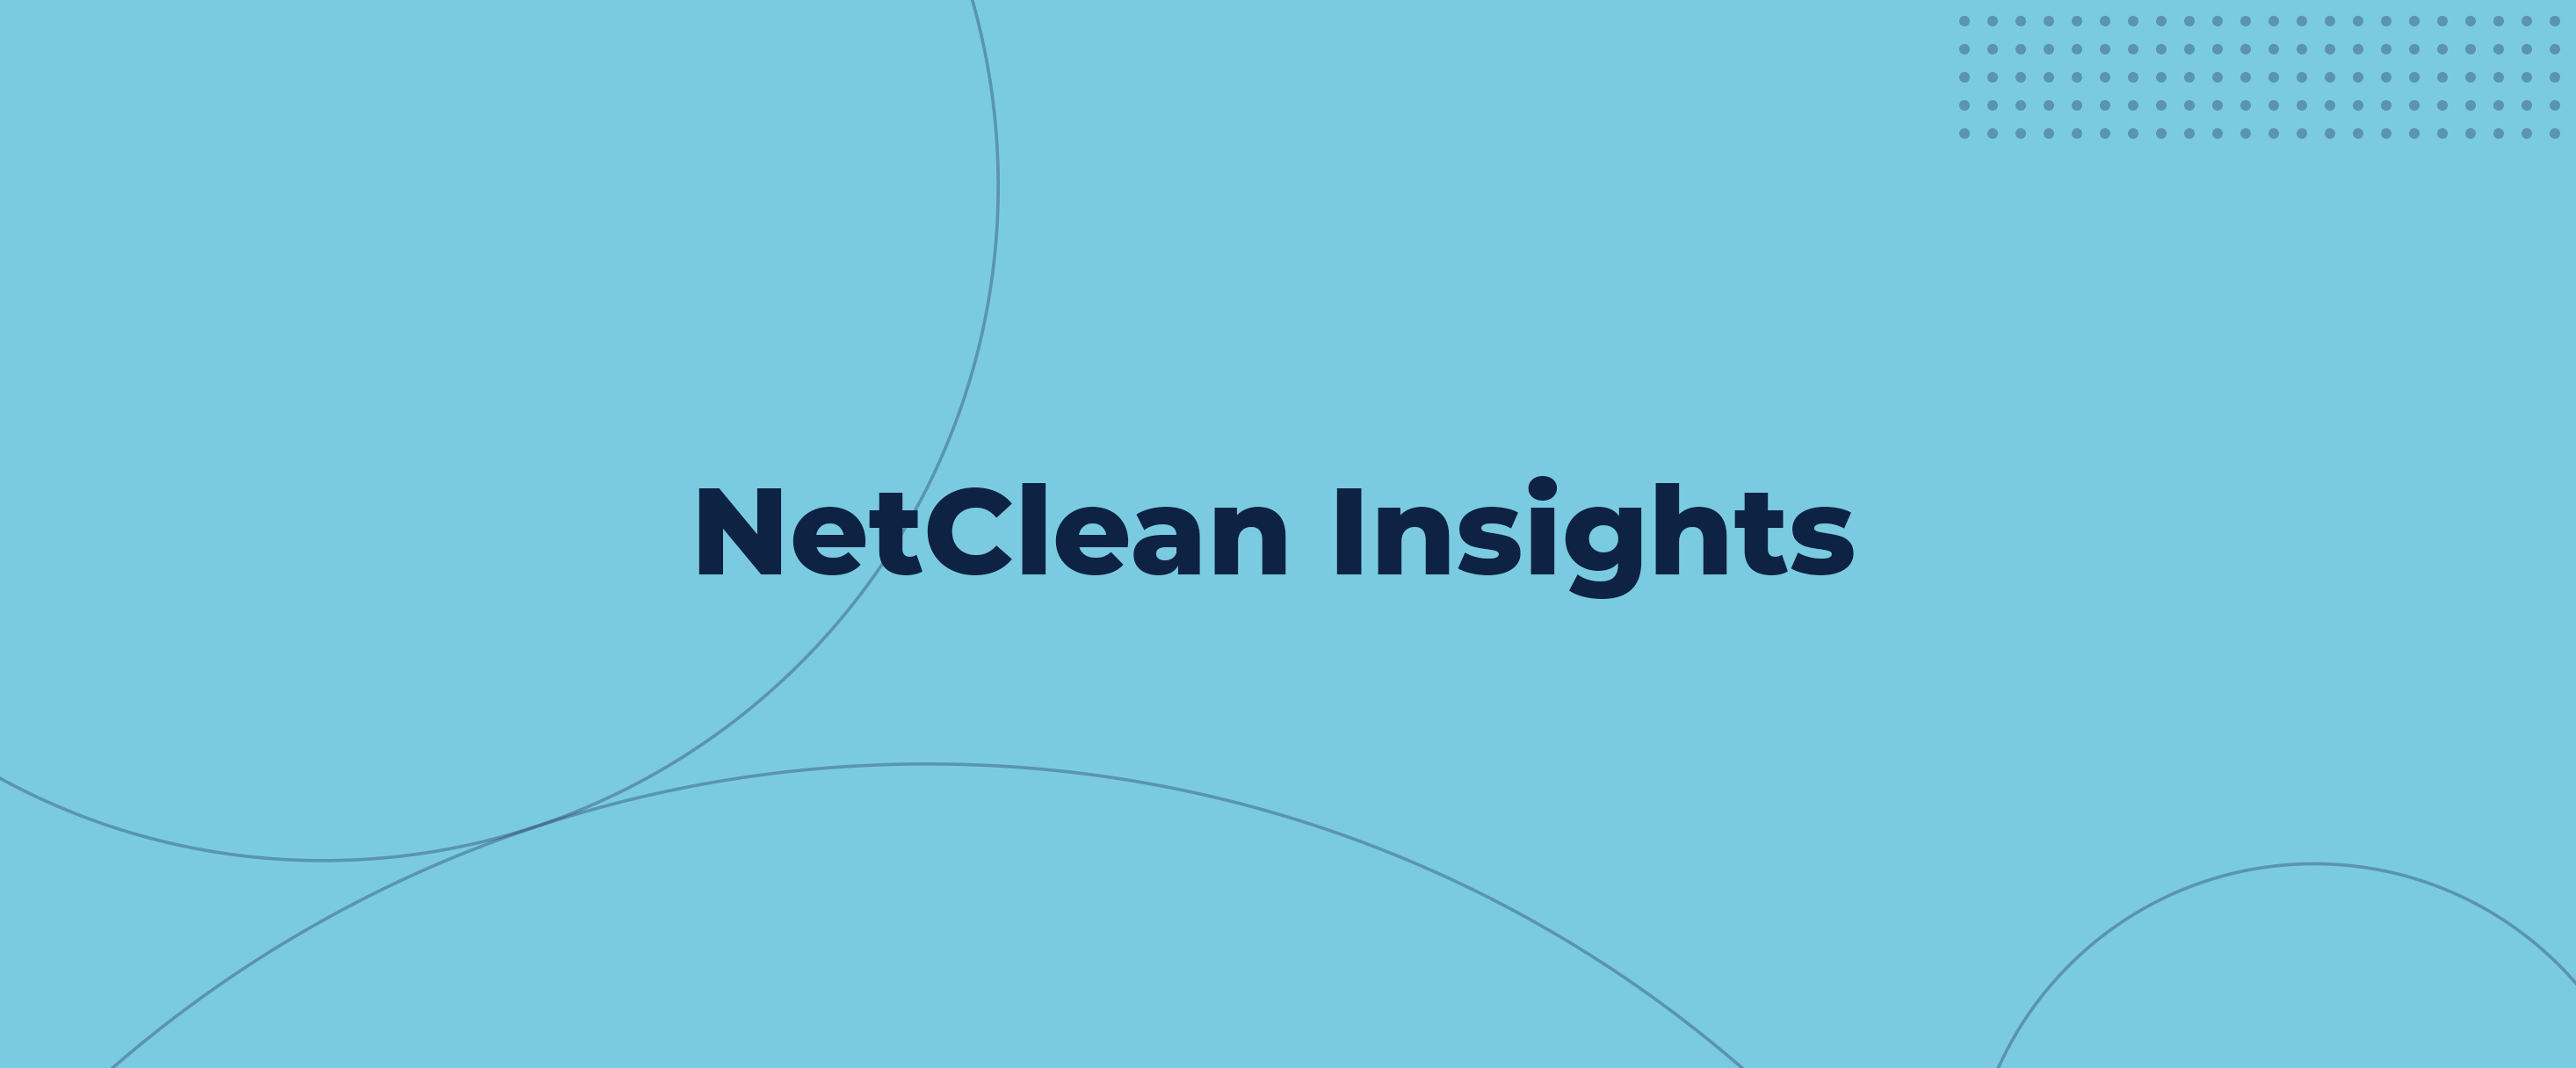 NetClean Insights text on blue background